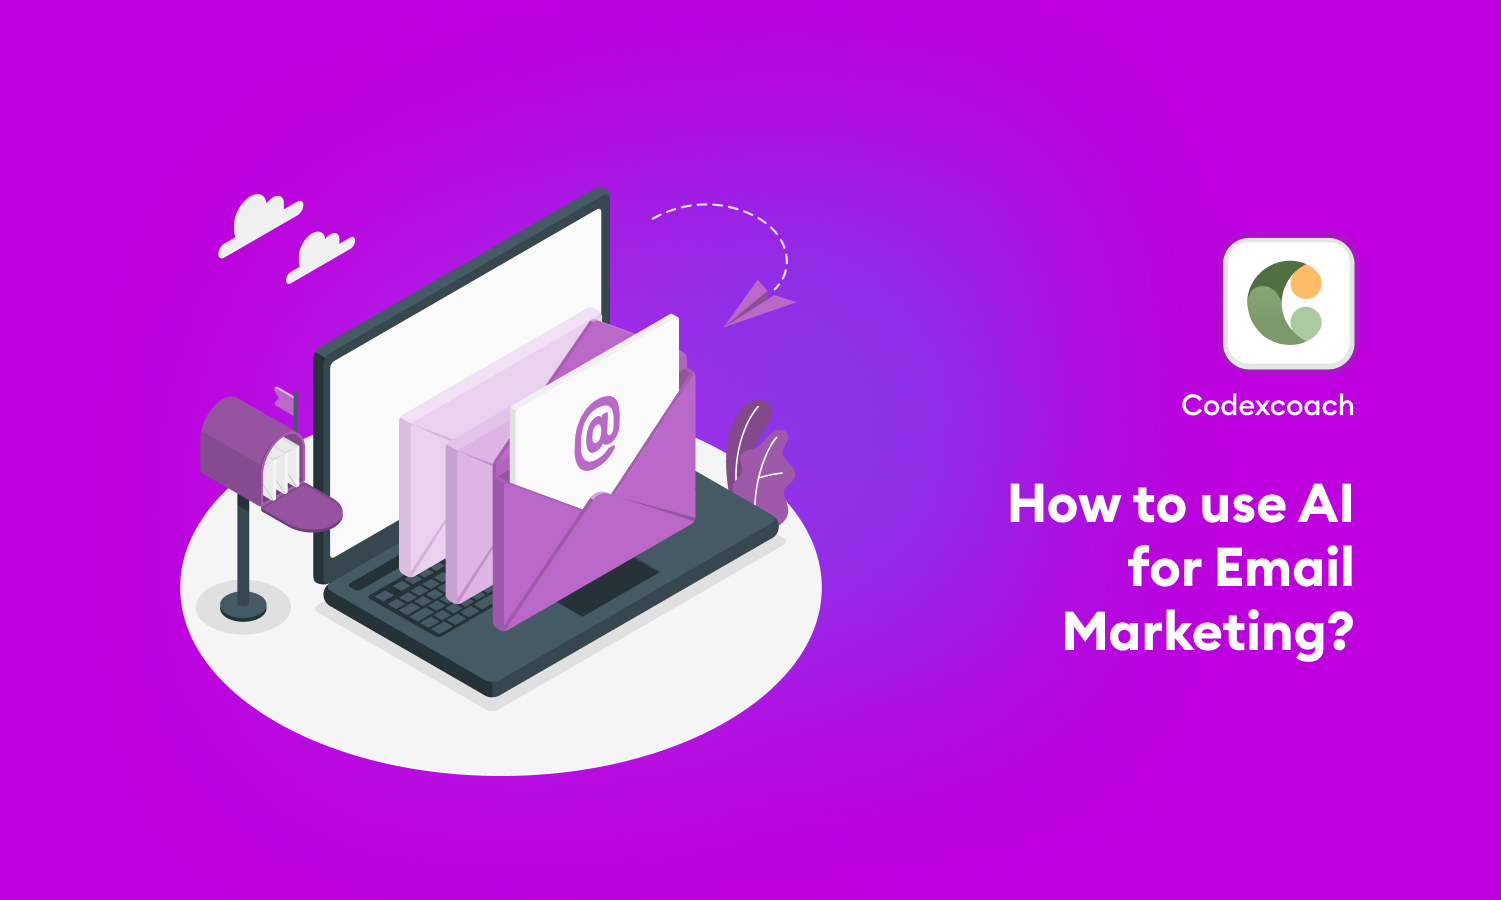 How to use AI for Email Marketing?